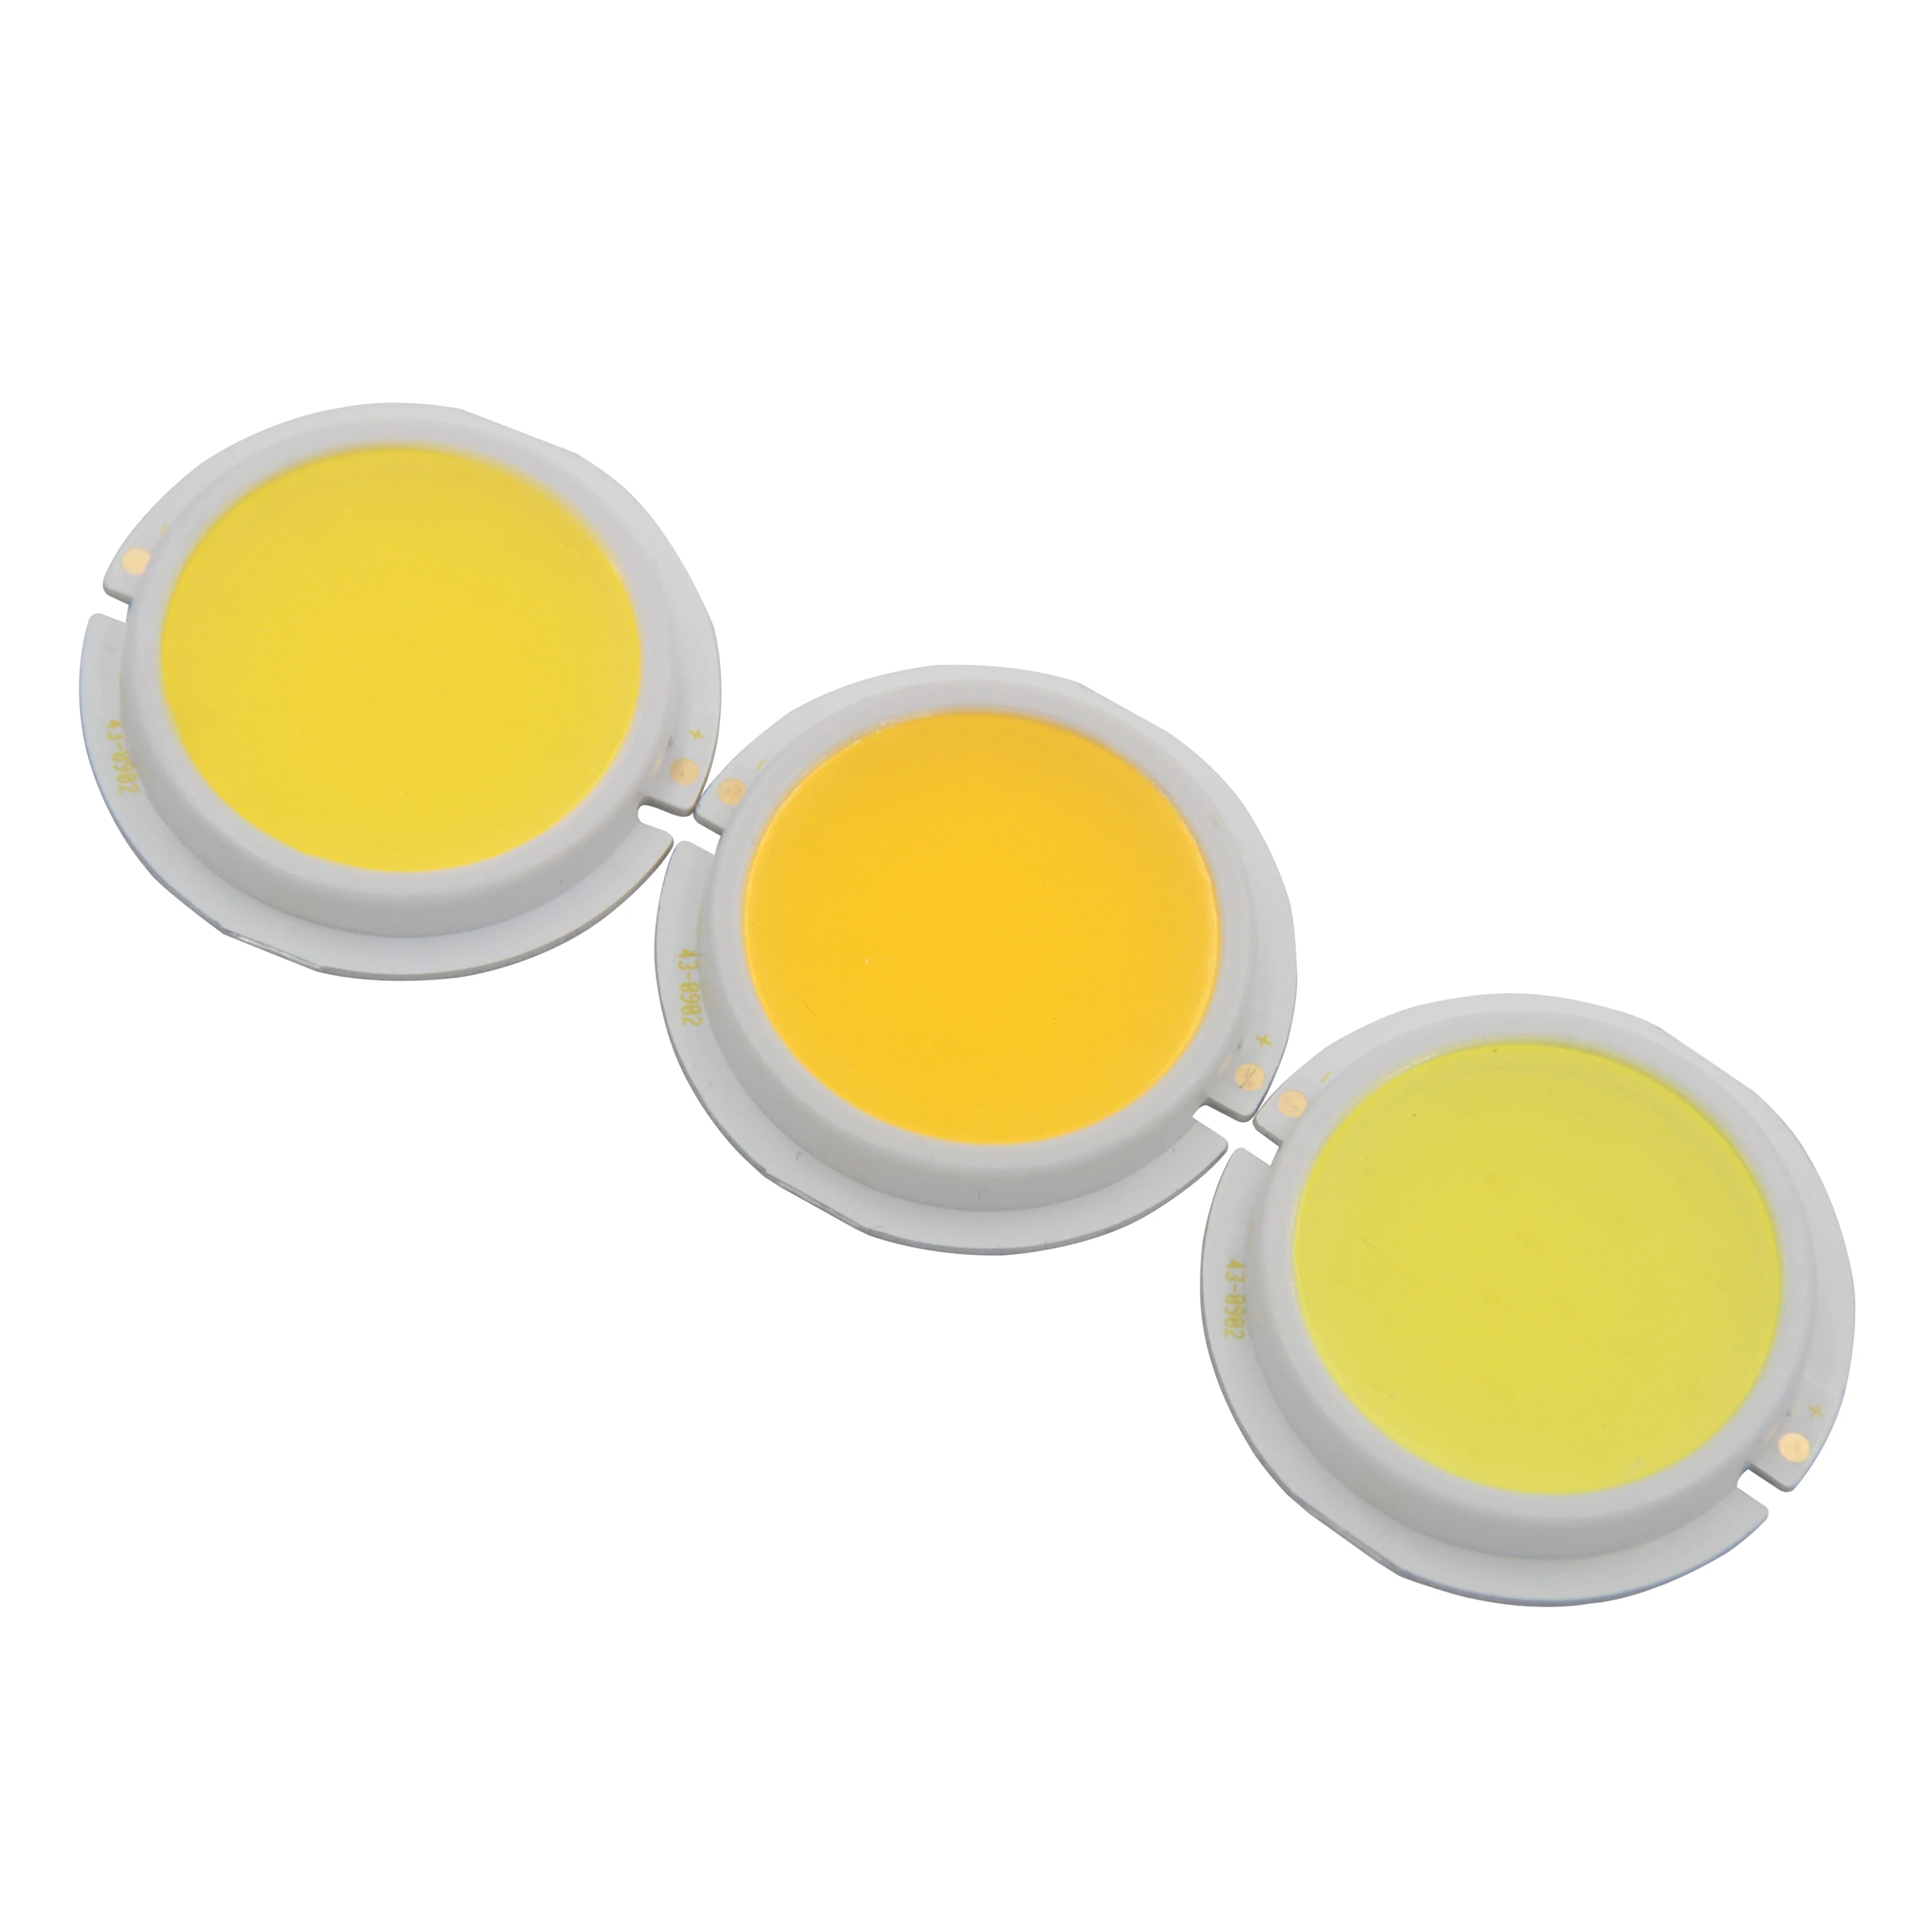 Sale thicken LED COB Light Source round 43mm for spotlight bulb lamp module genesis chip 3W 5W 7W 9W Warm Nature White COB LED images - 6